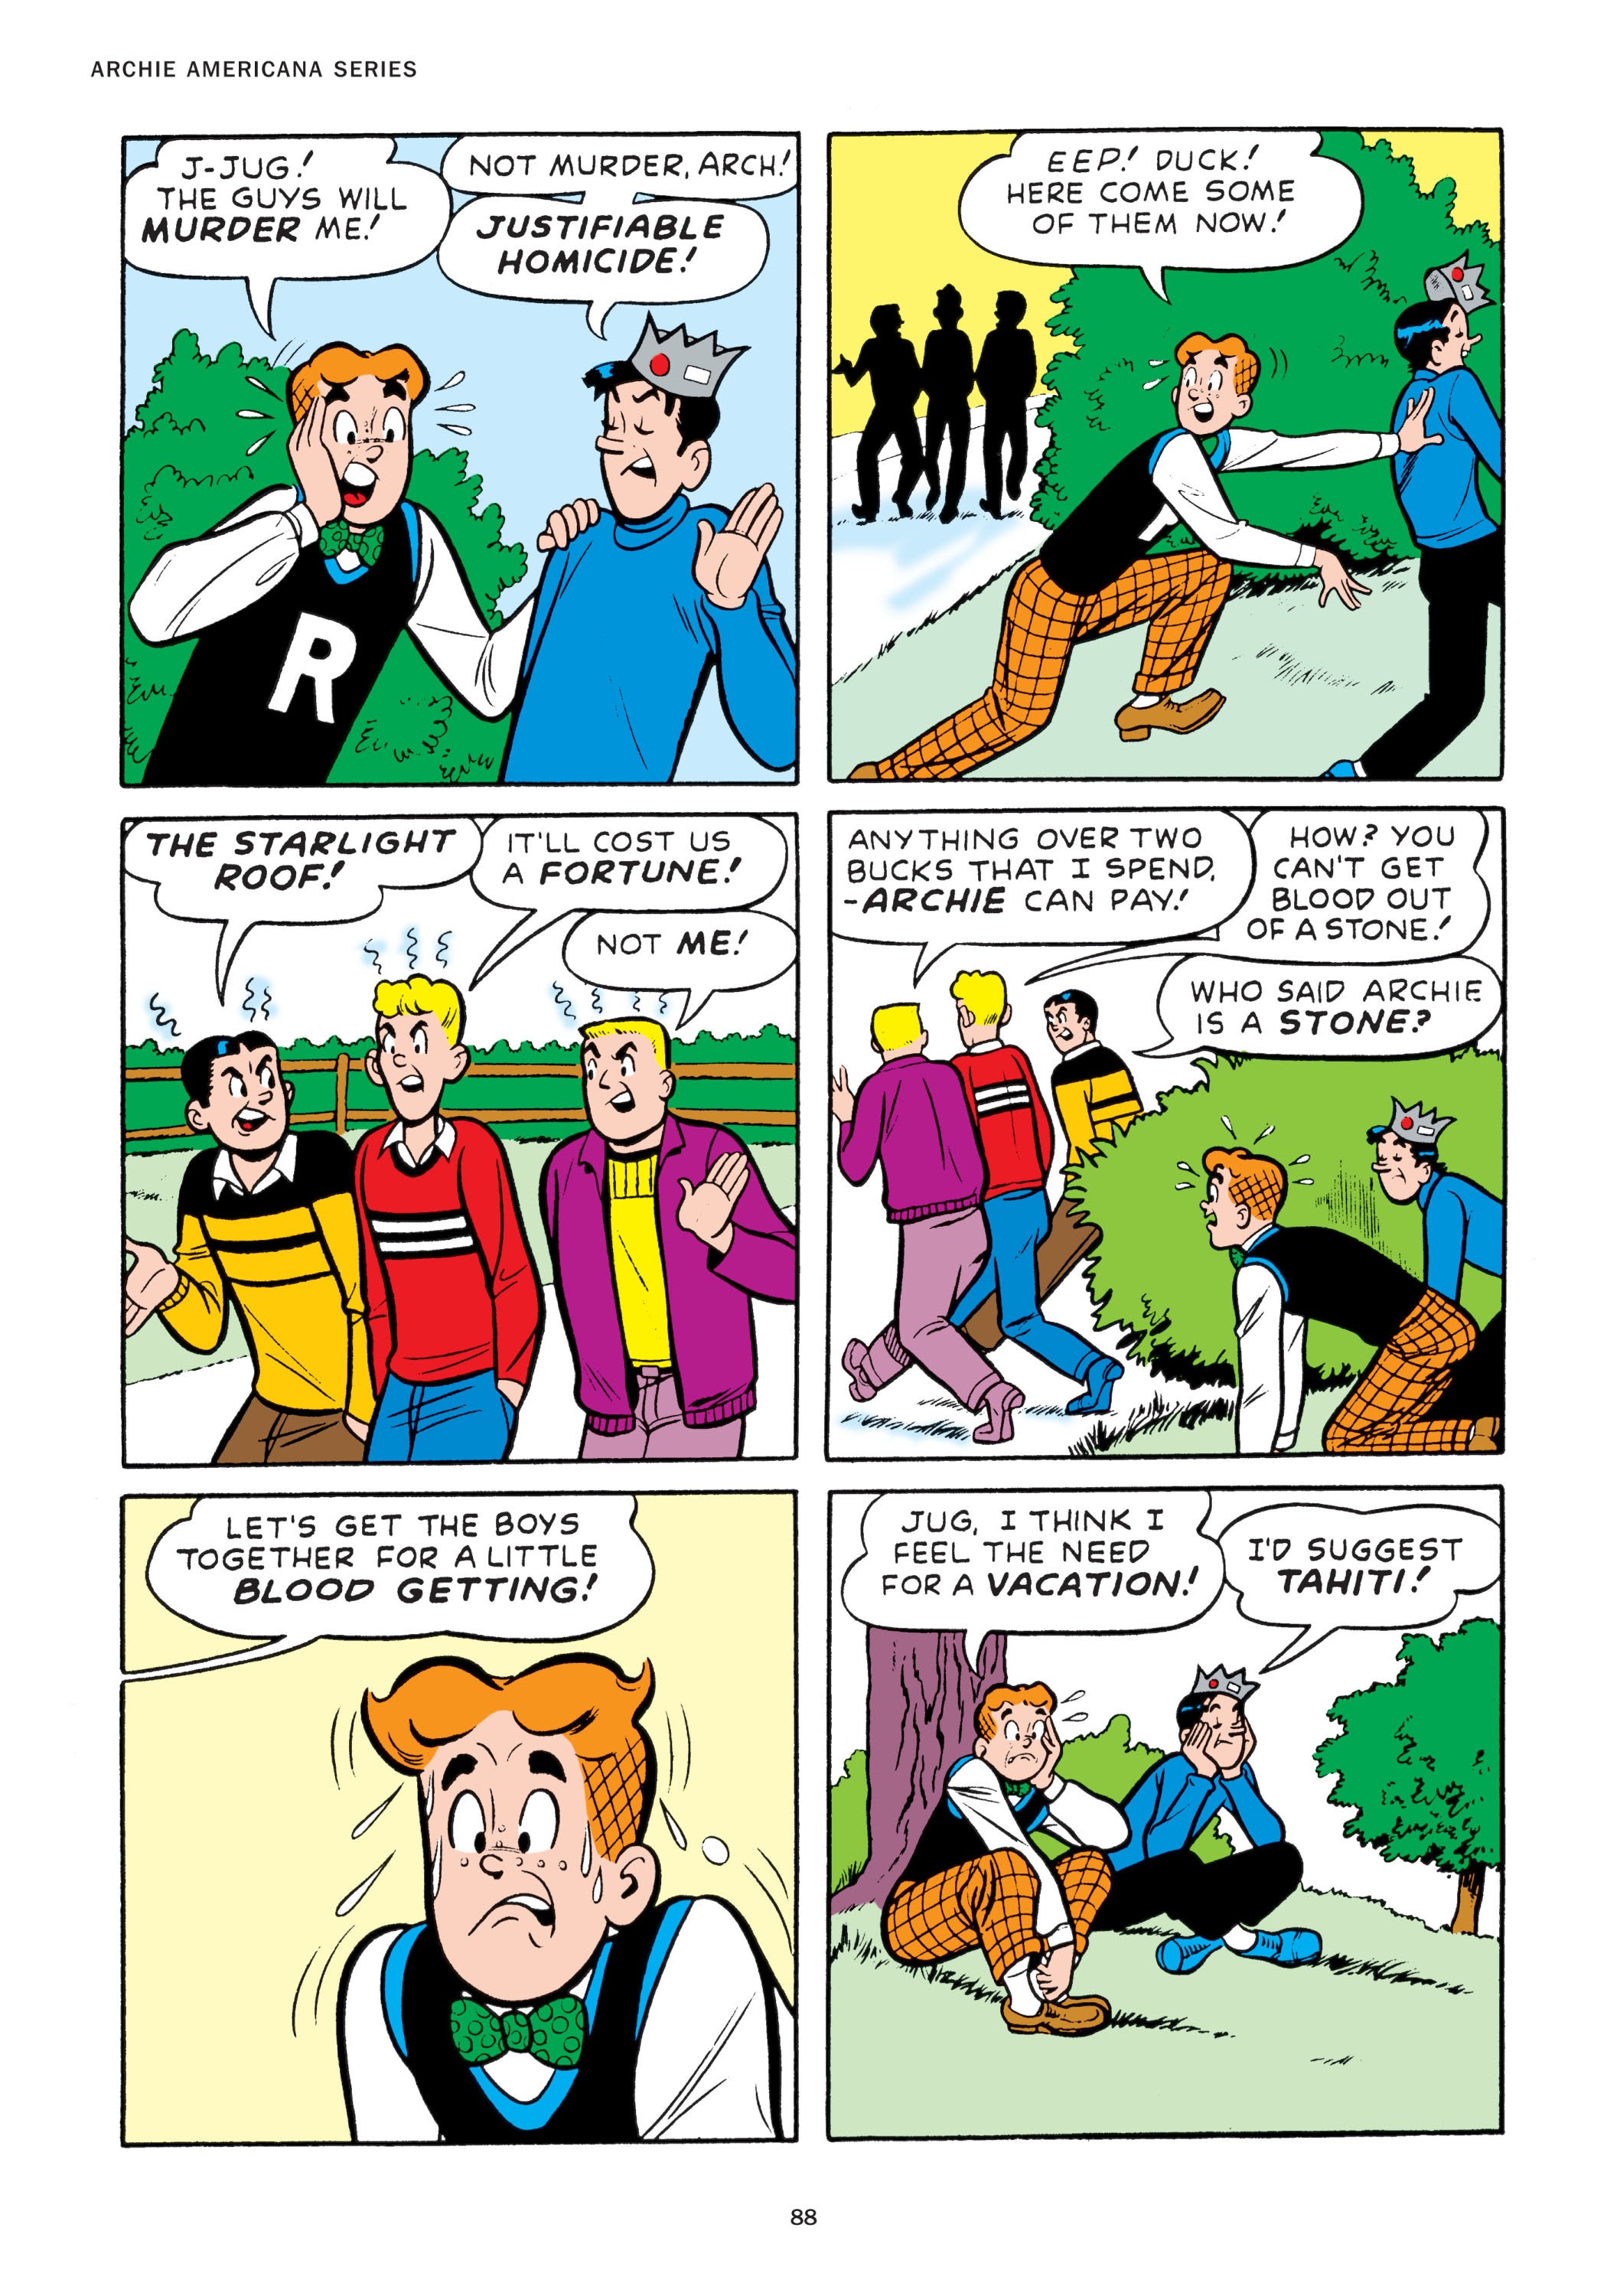 Read online Archie Americana Series comic -  Issue # TPB 7 - 89